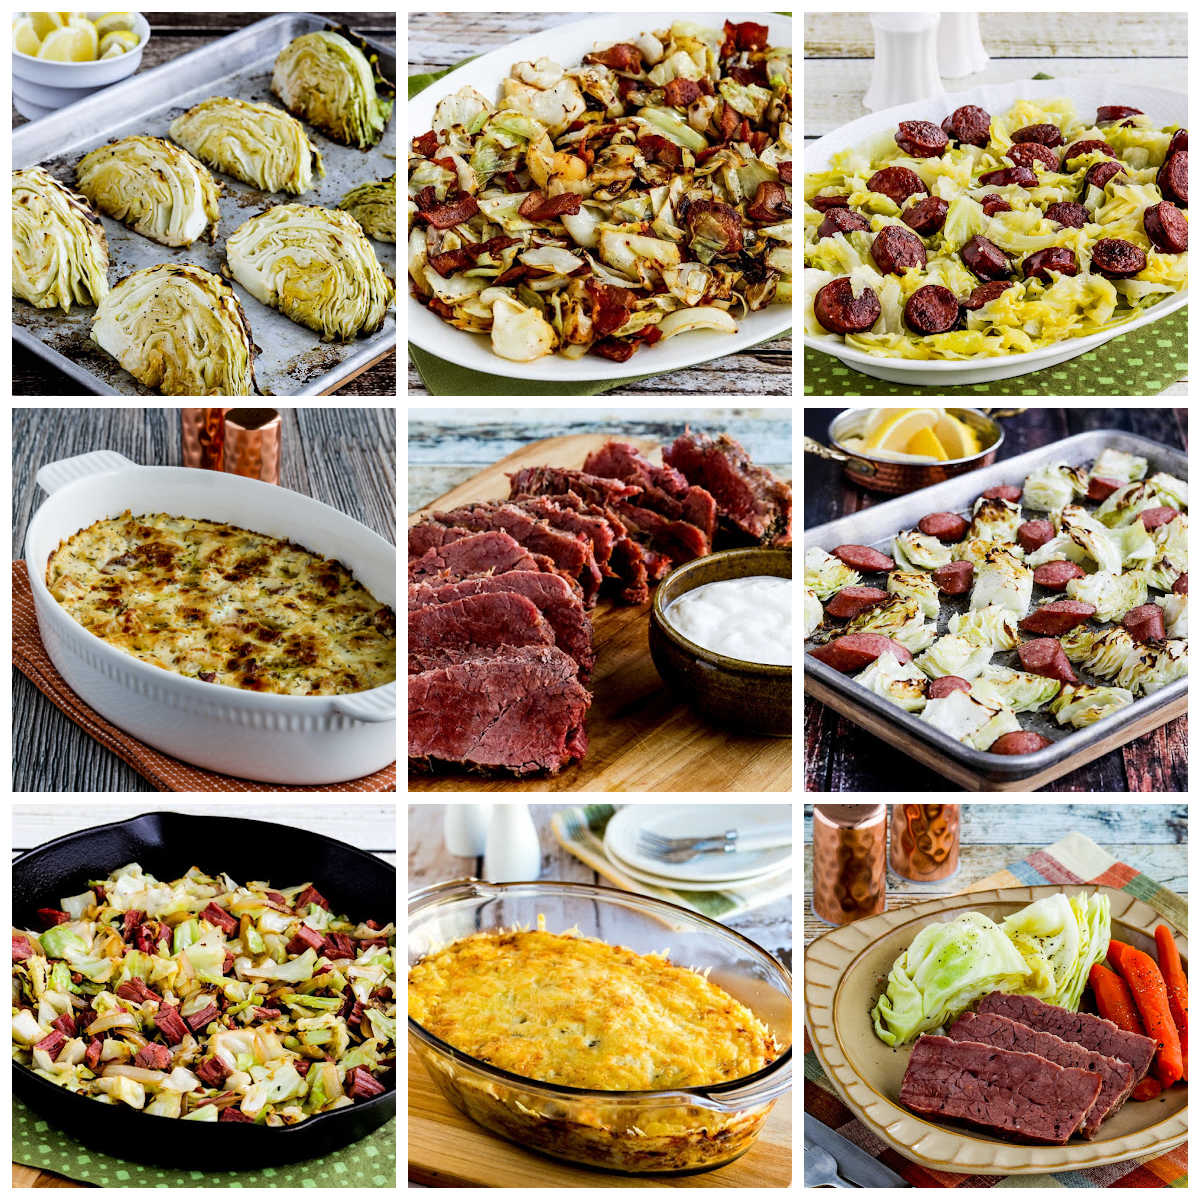 Irish-Inspired Low Carb and Keto Recipes for St. Patrick's Day Recipe Collage